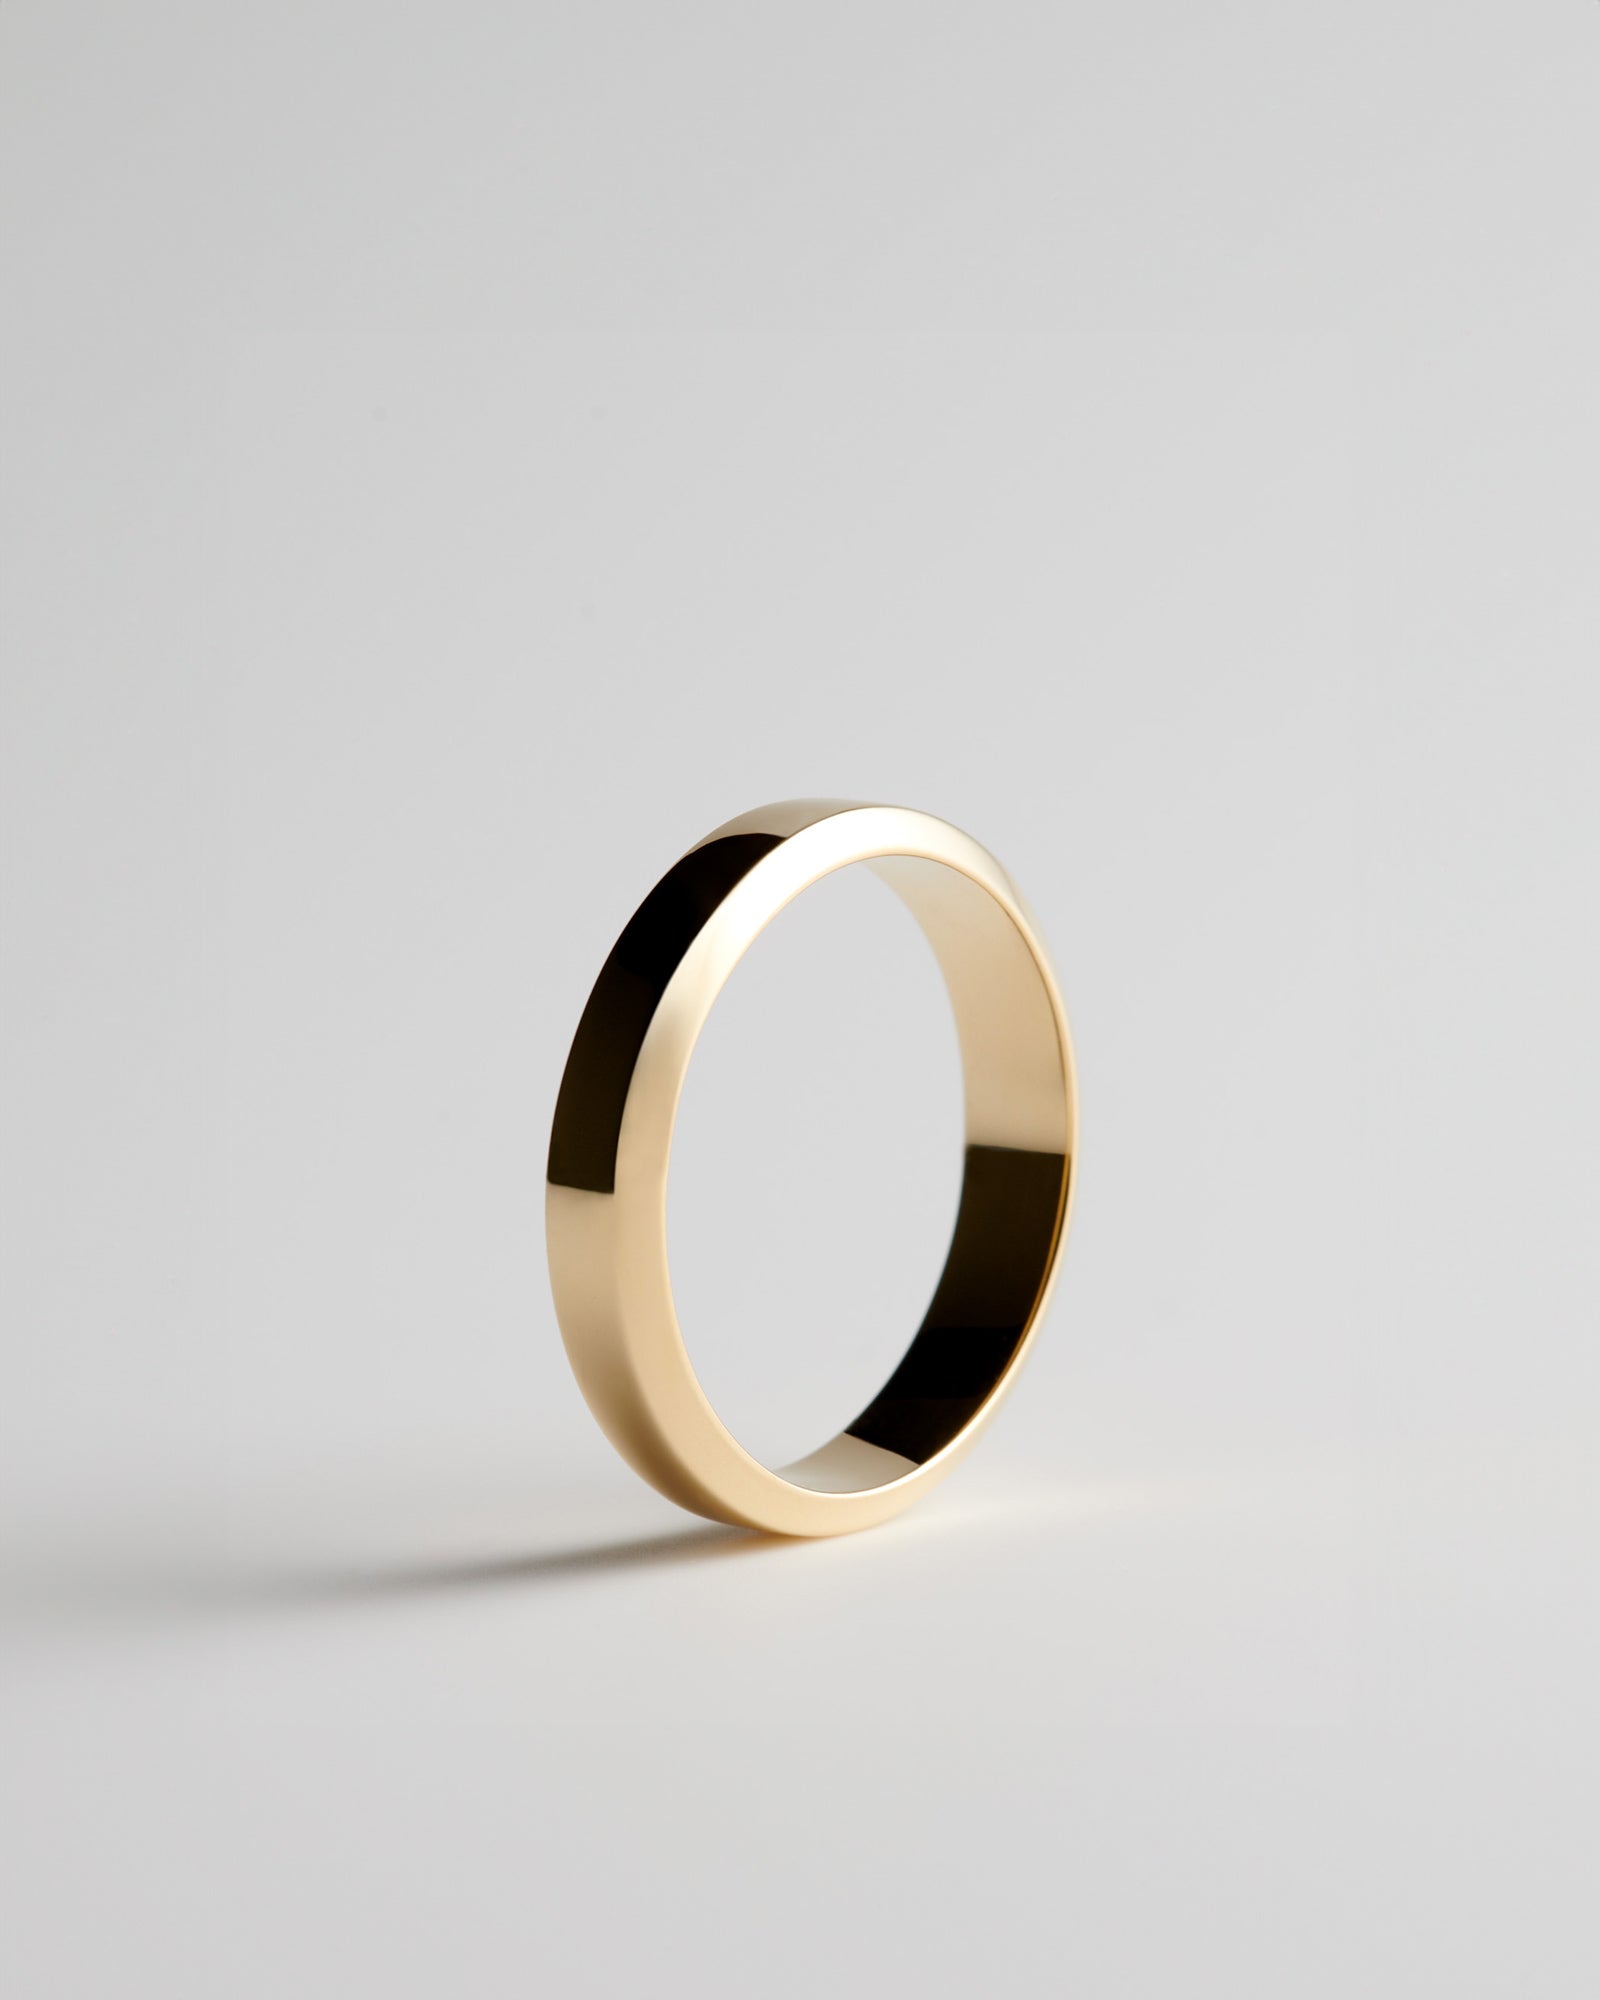 The Song Ring